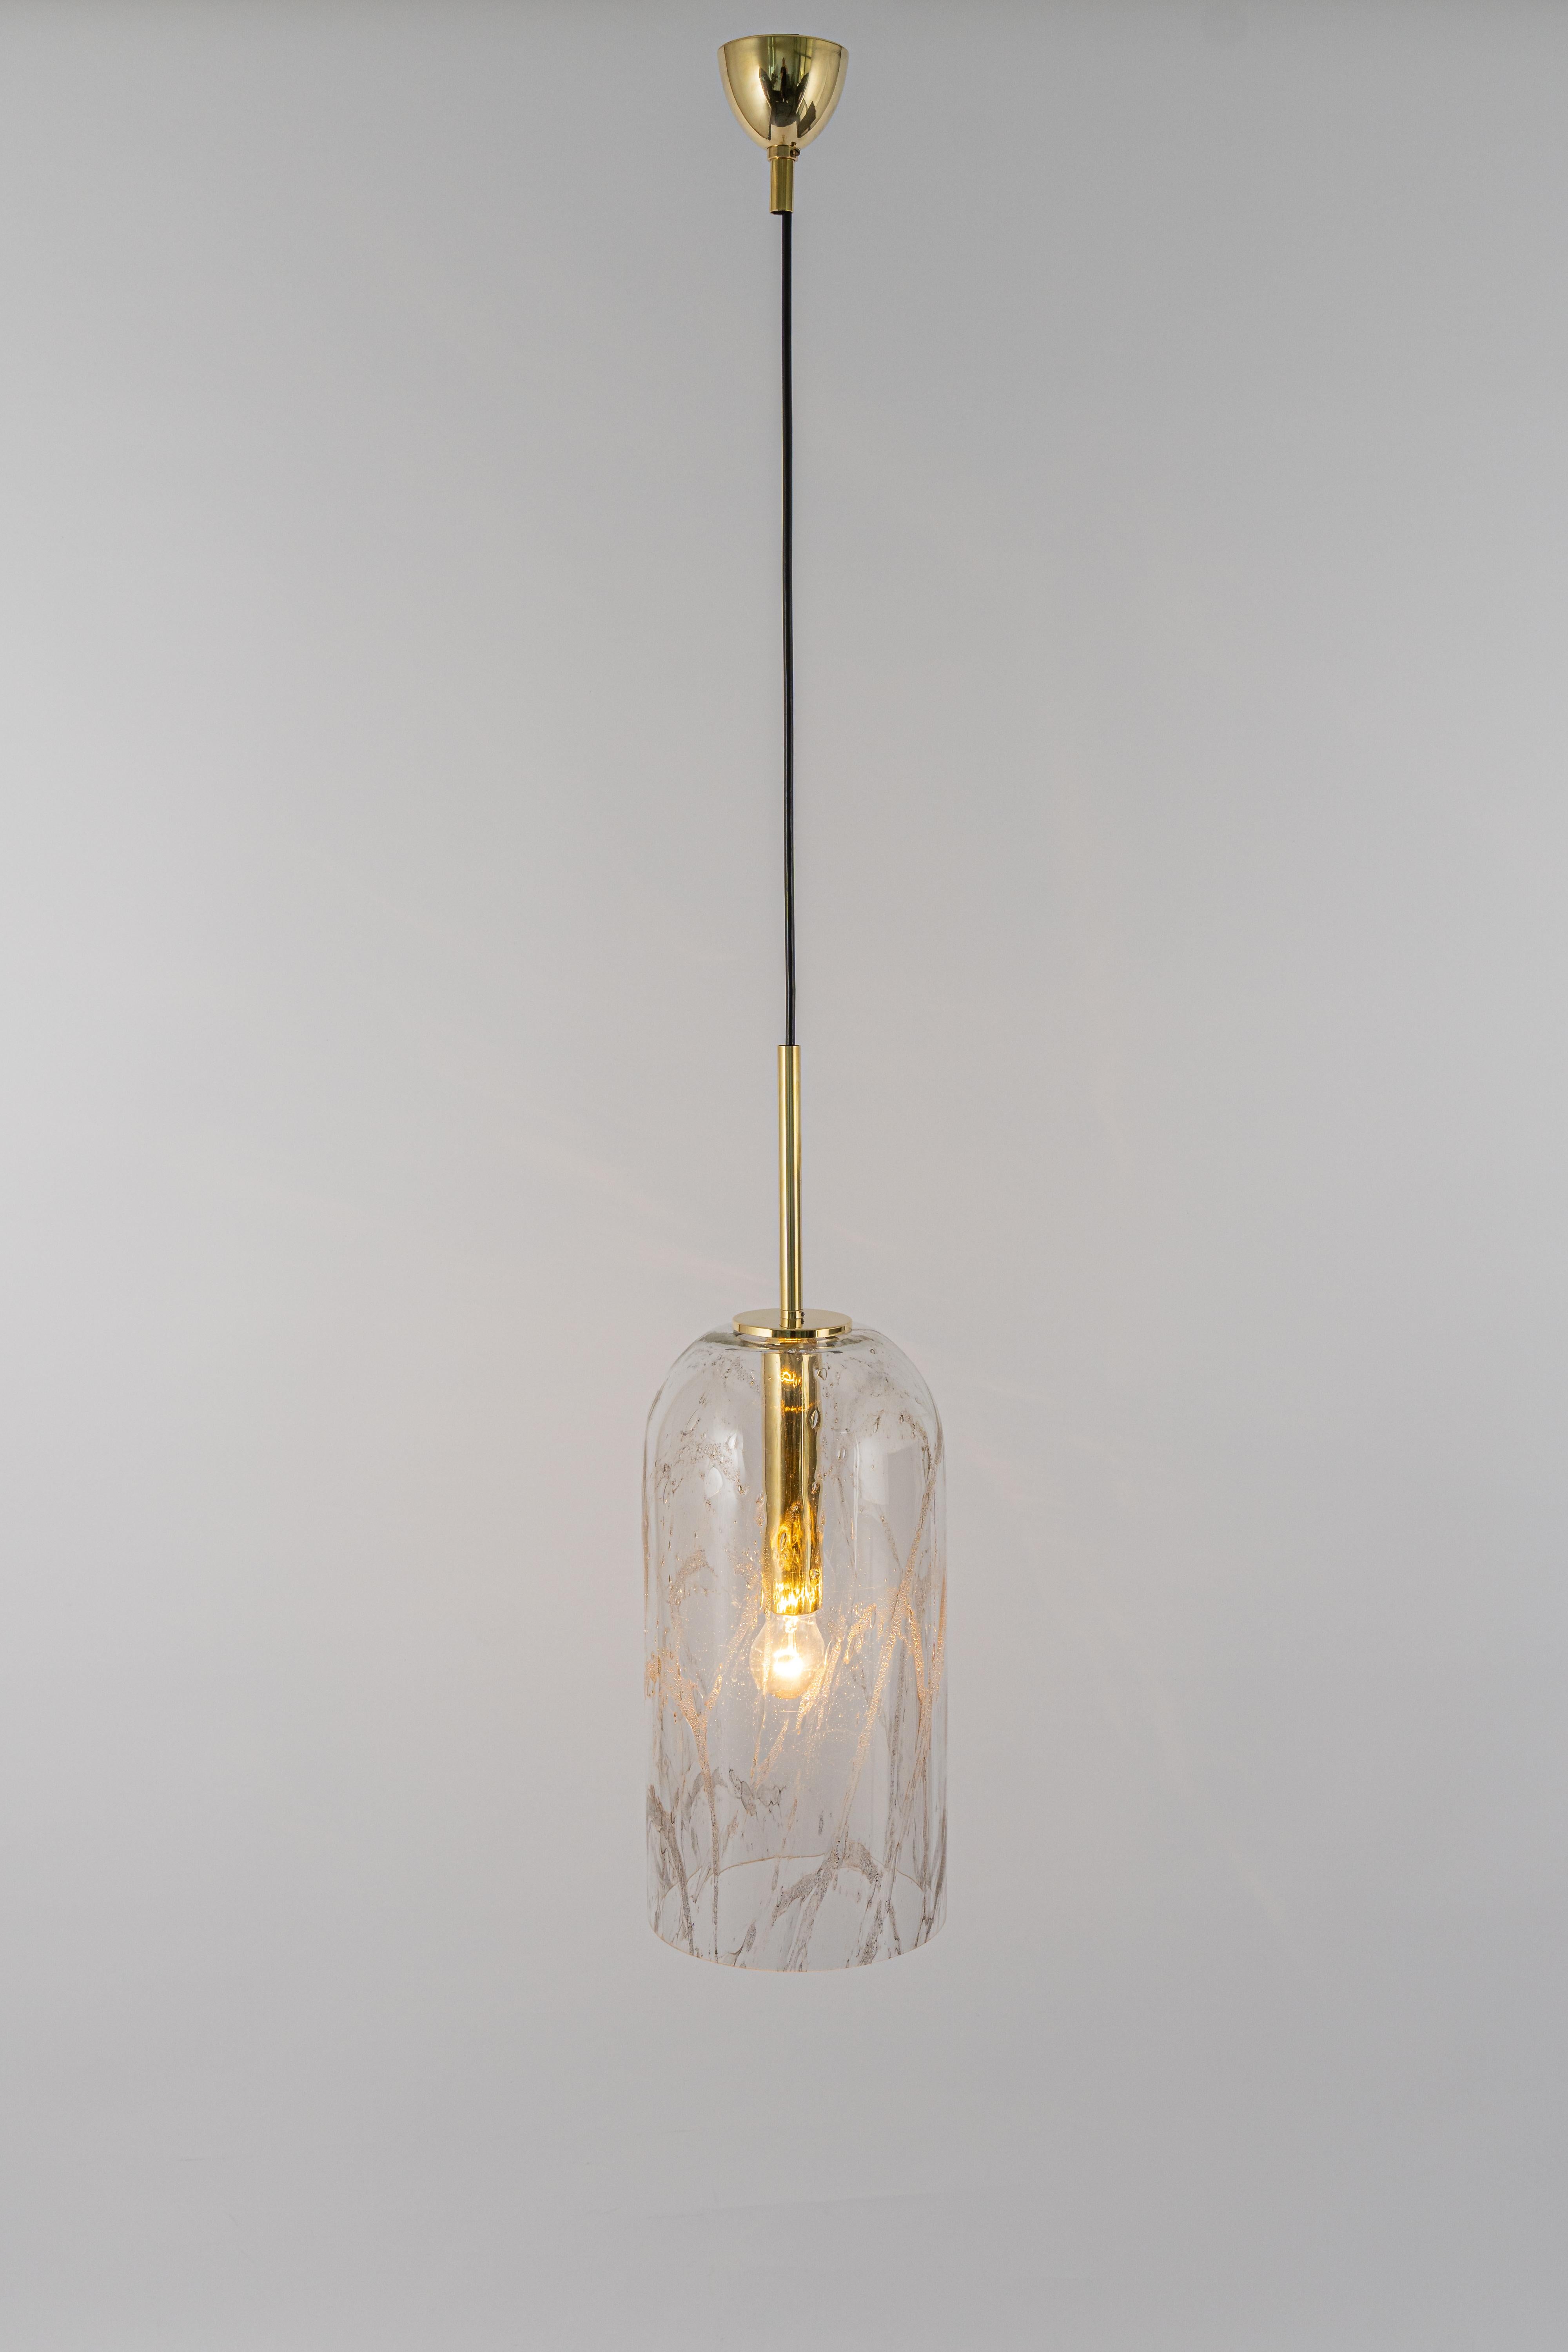 Sef of 3 Large Glass Pendant lights by Limburg, Germany, 1970s For Sale 4